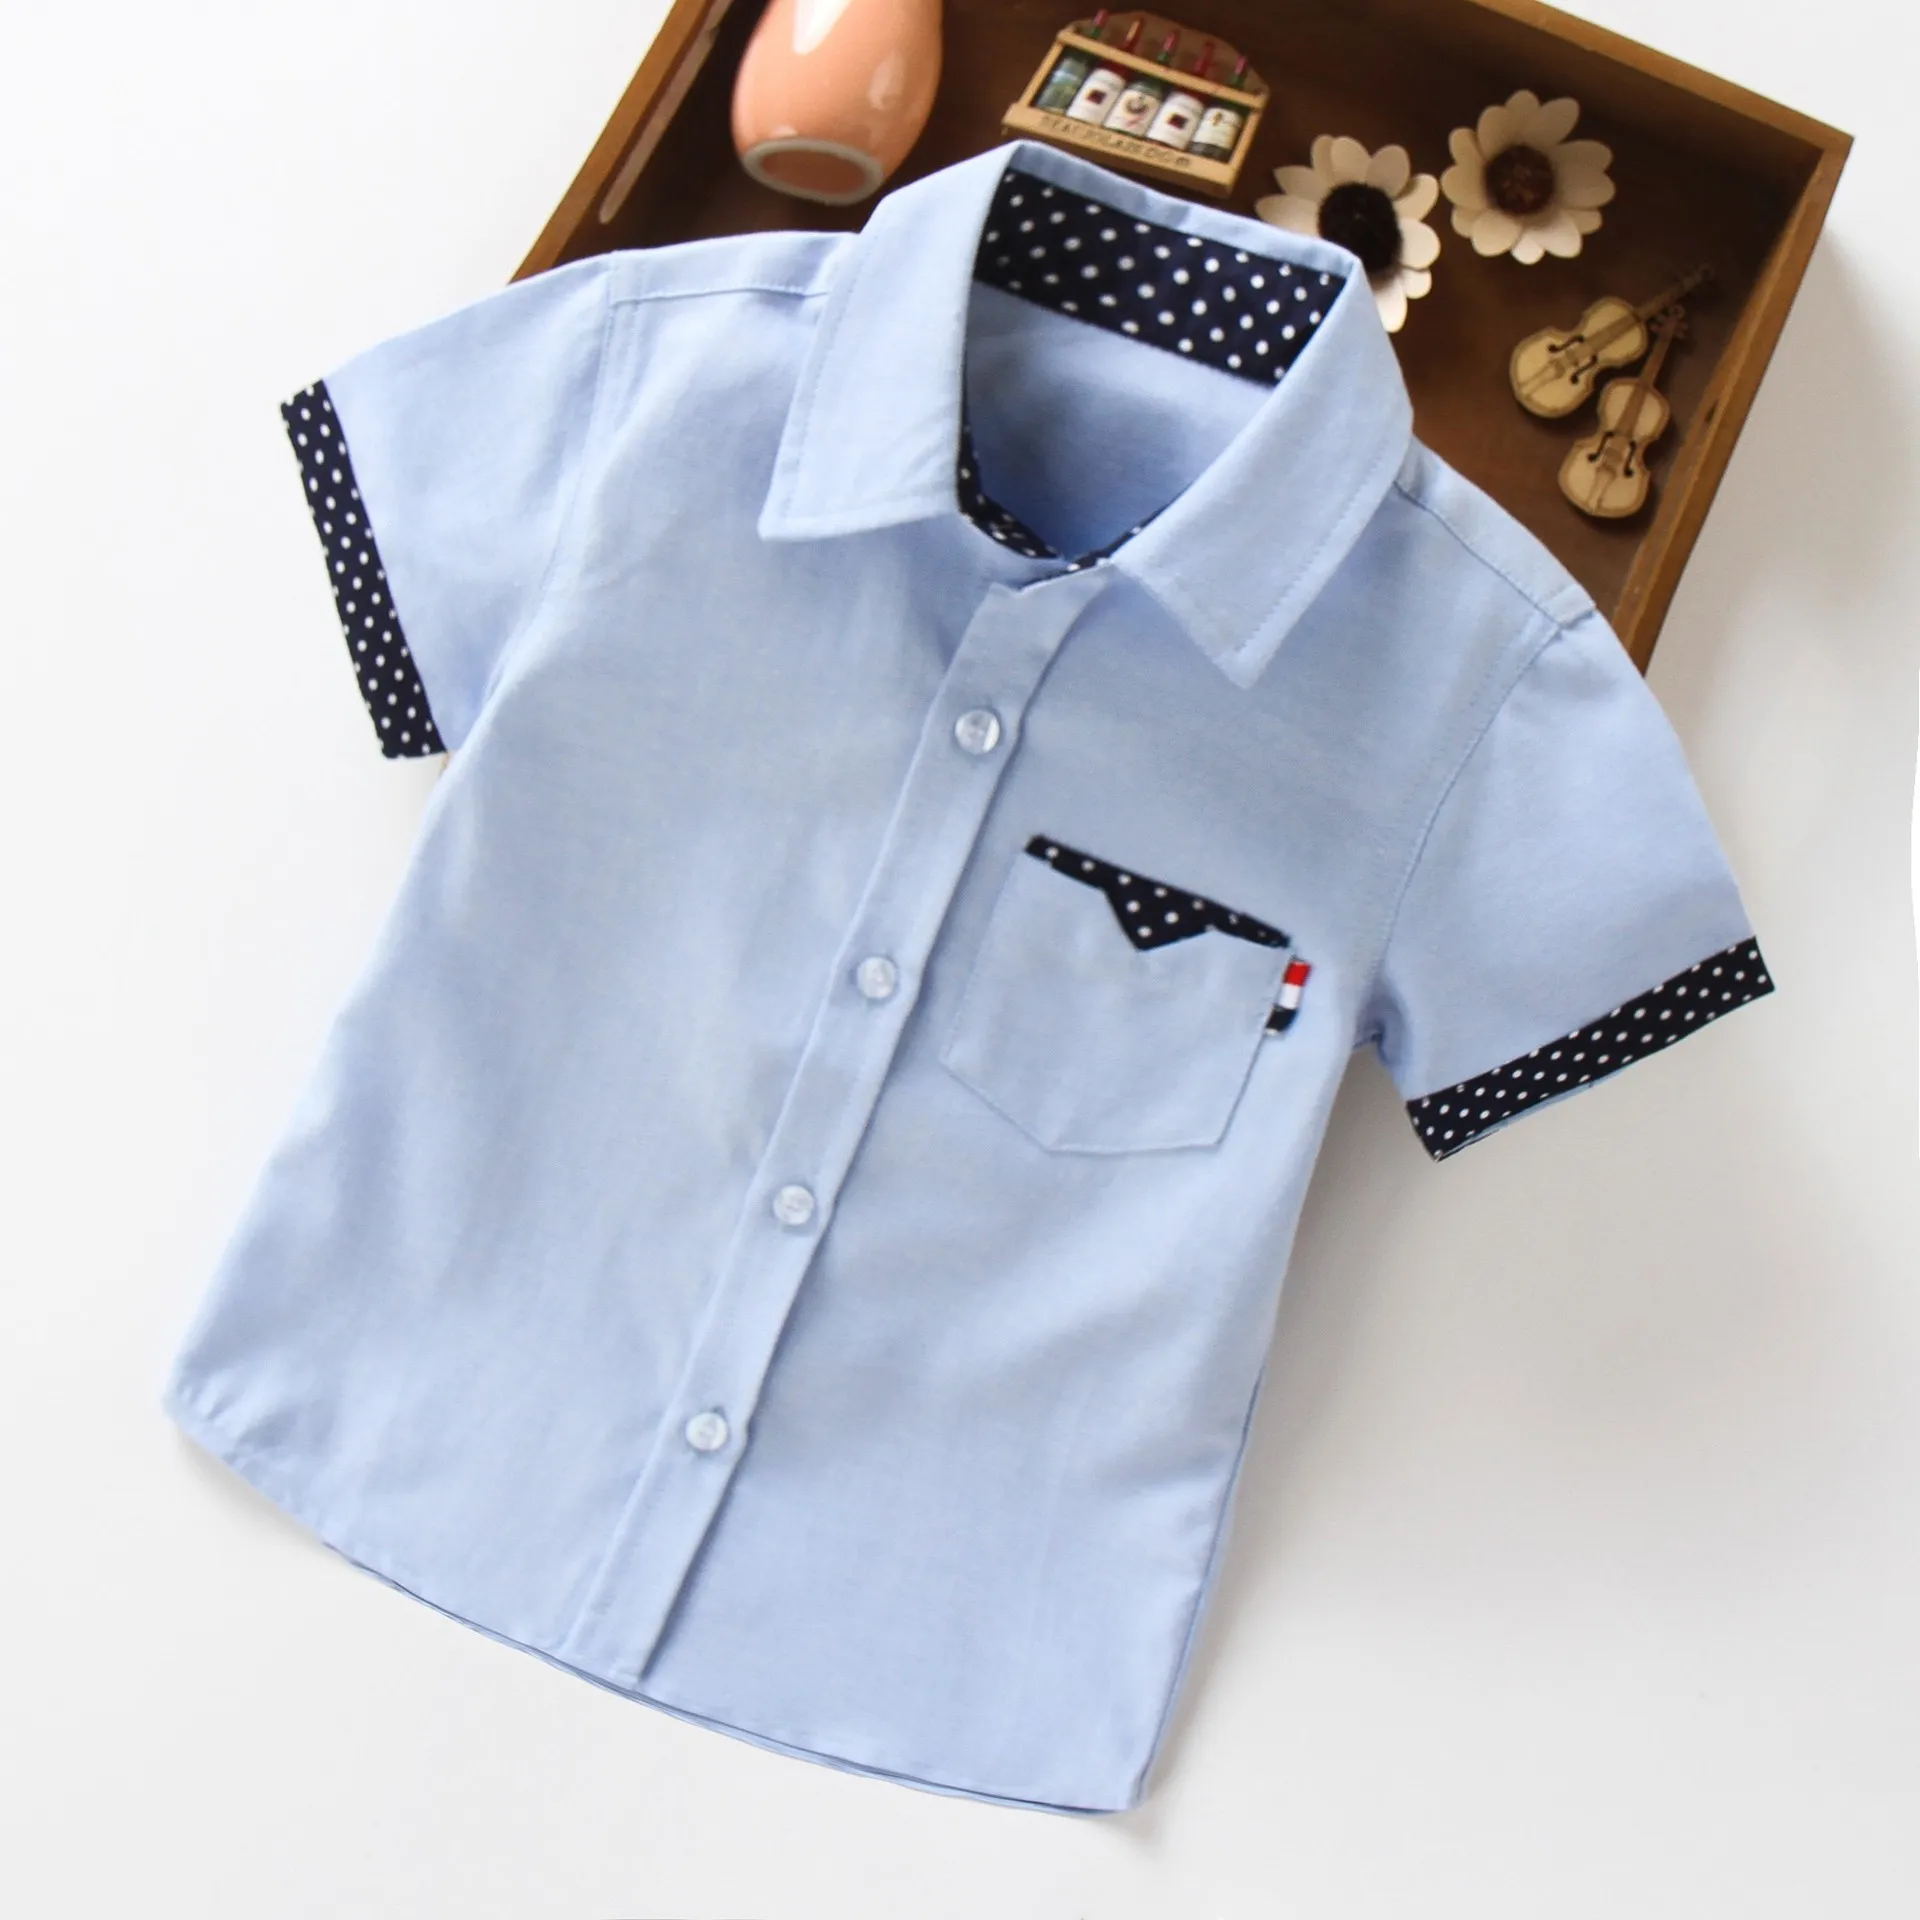 2022 Hot Sale Children Shirts Fashion Solid Cotton Short-sleeved Boys Shirts For 2-14Age kids Blouses clothes Baby Shirts Tops